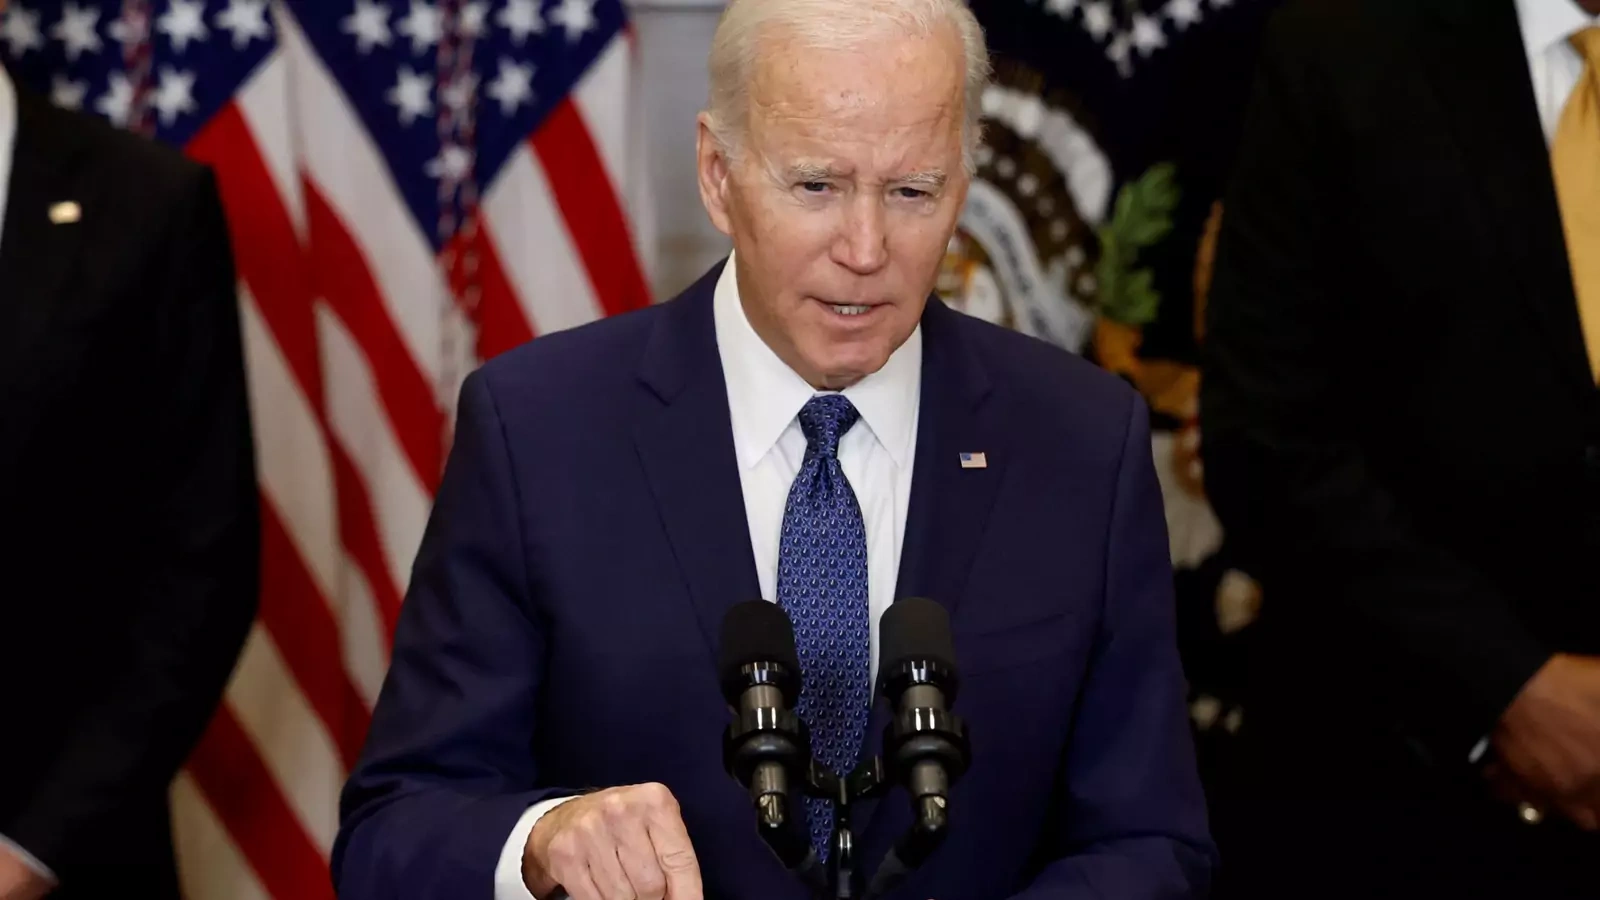 U.S. President Biden speaks about continued support for Ukraine at the White House in Washington.